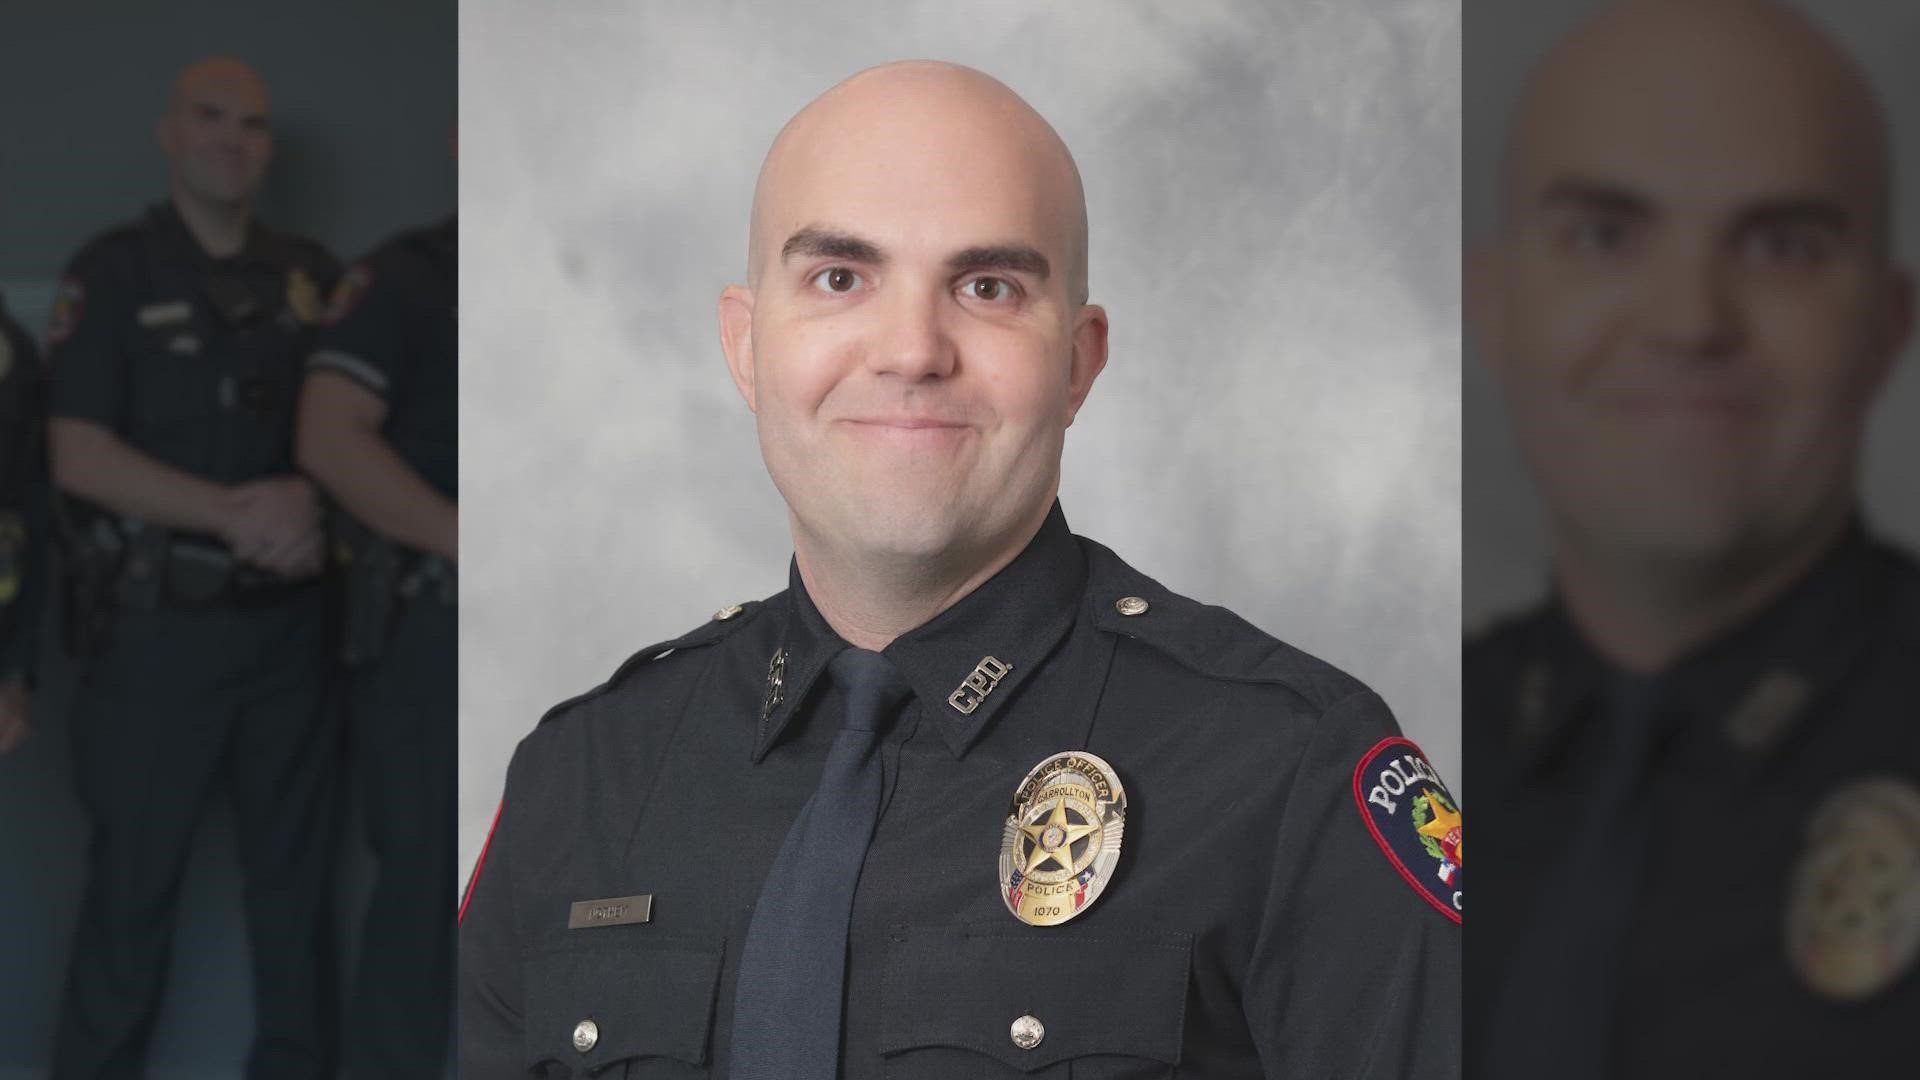 Officer Steve Nothem is the Carrollton, Texas, police department's first line of duty death.